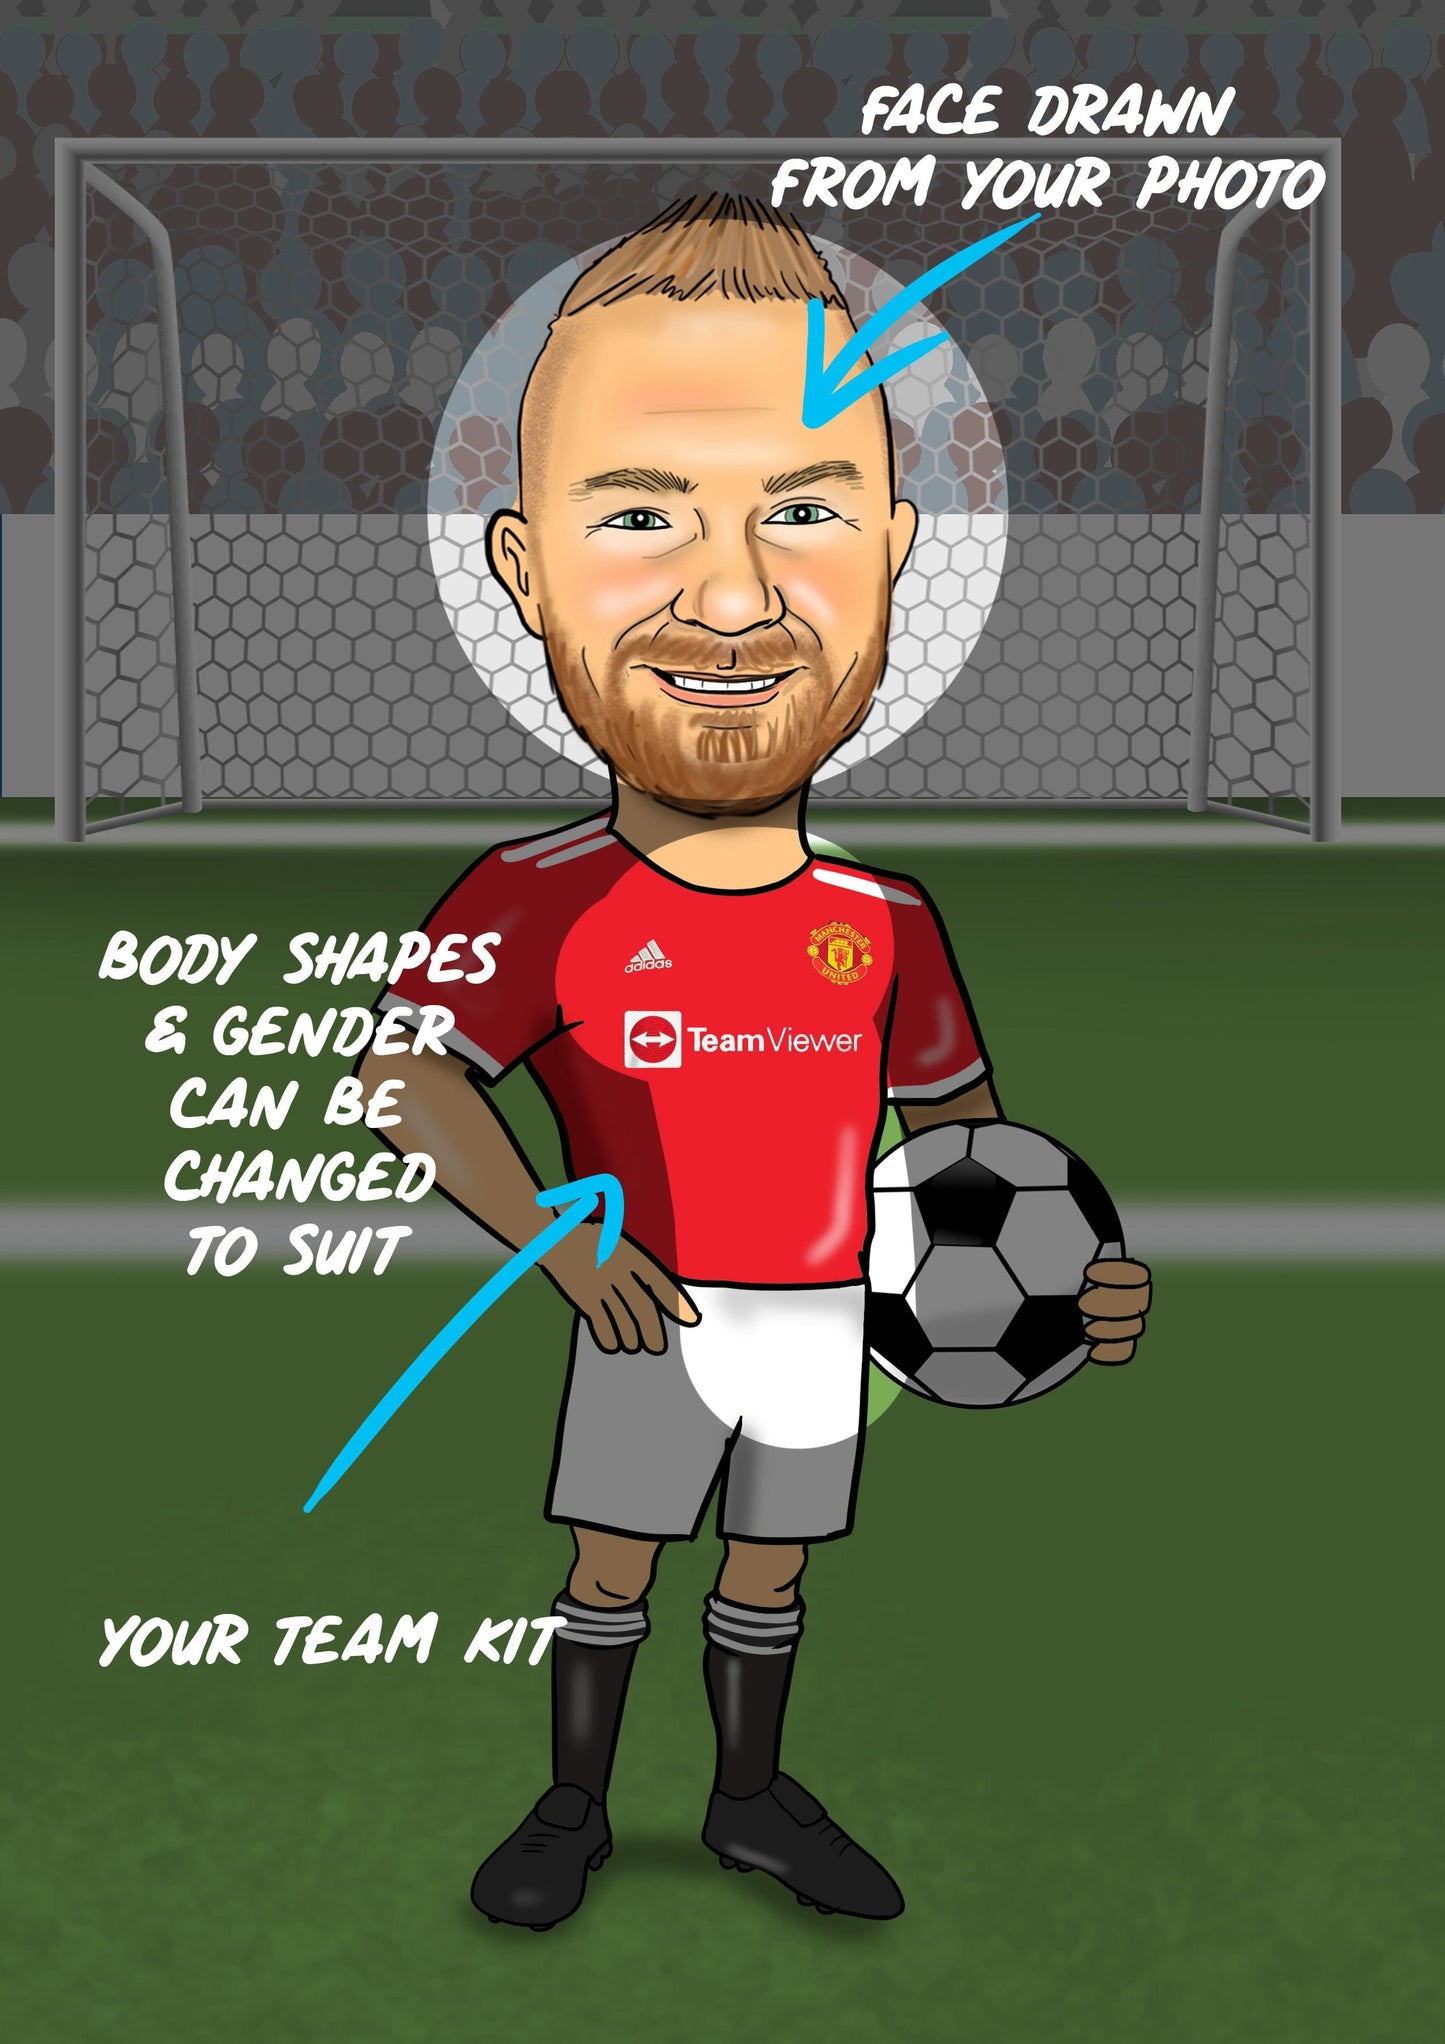 Football/Soccer Player Caricature - standing pose